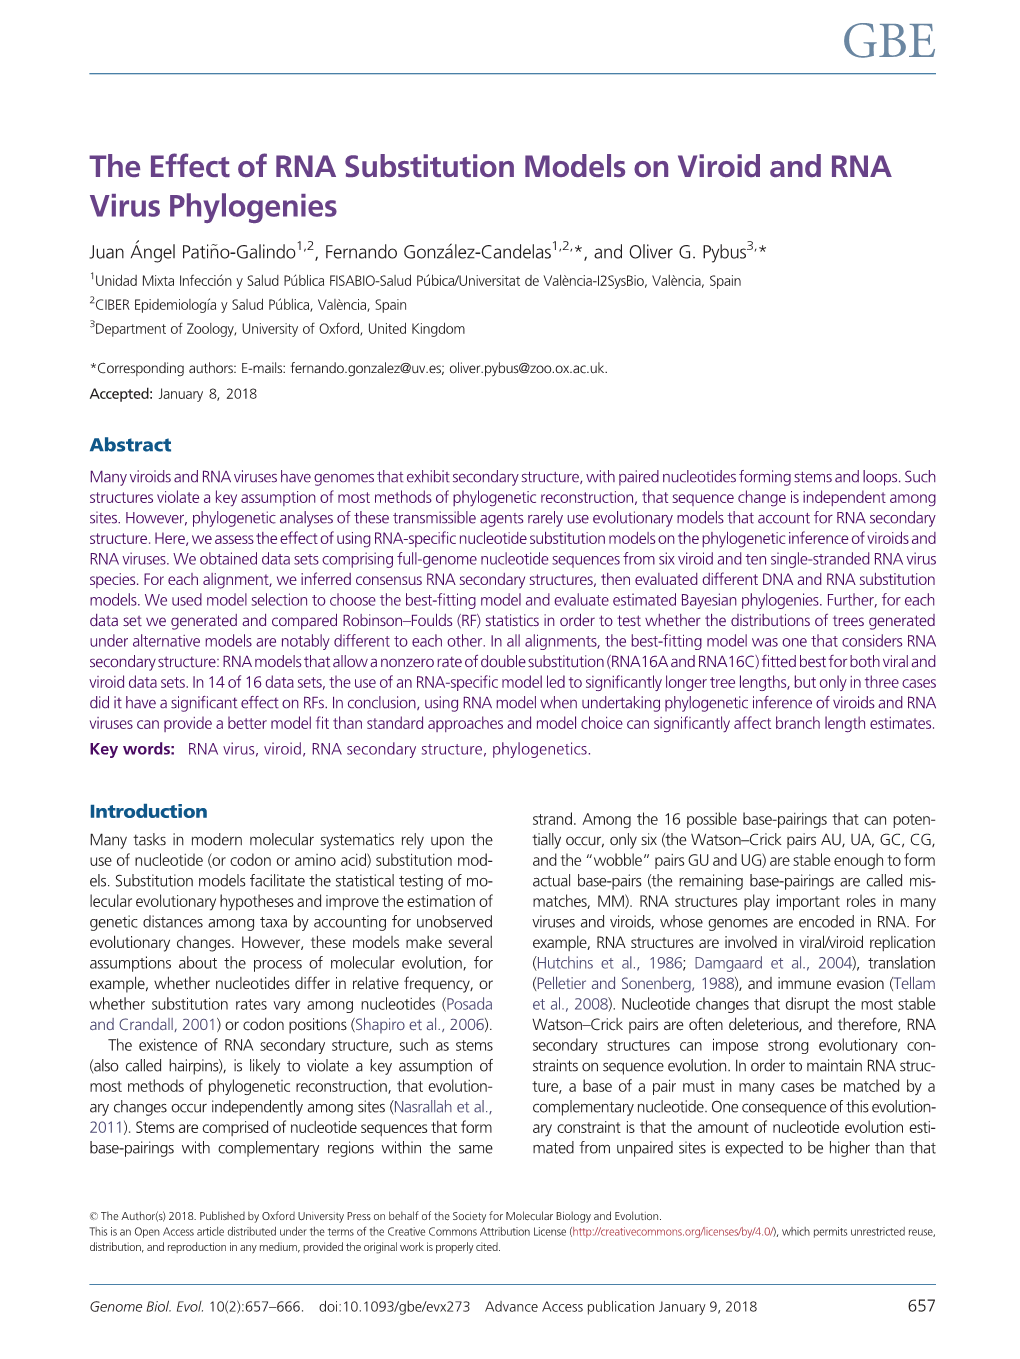 The Effect of RNA Substitution Models on Viroid and RNA Virus Phylogenies